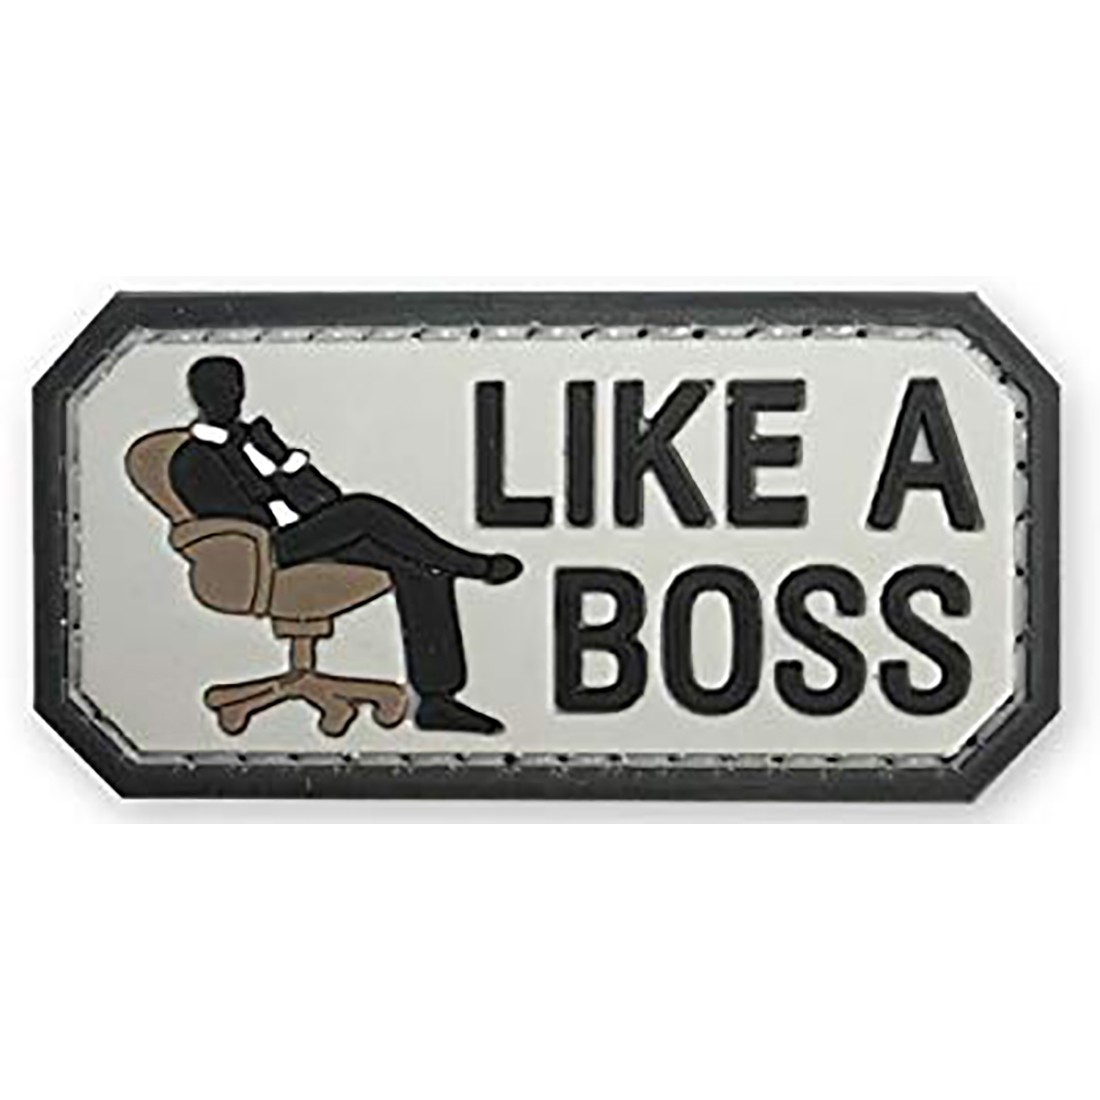 LIKE A BOSS Tactical Rubber Velcro Patches